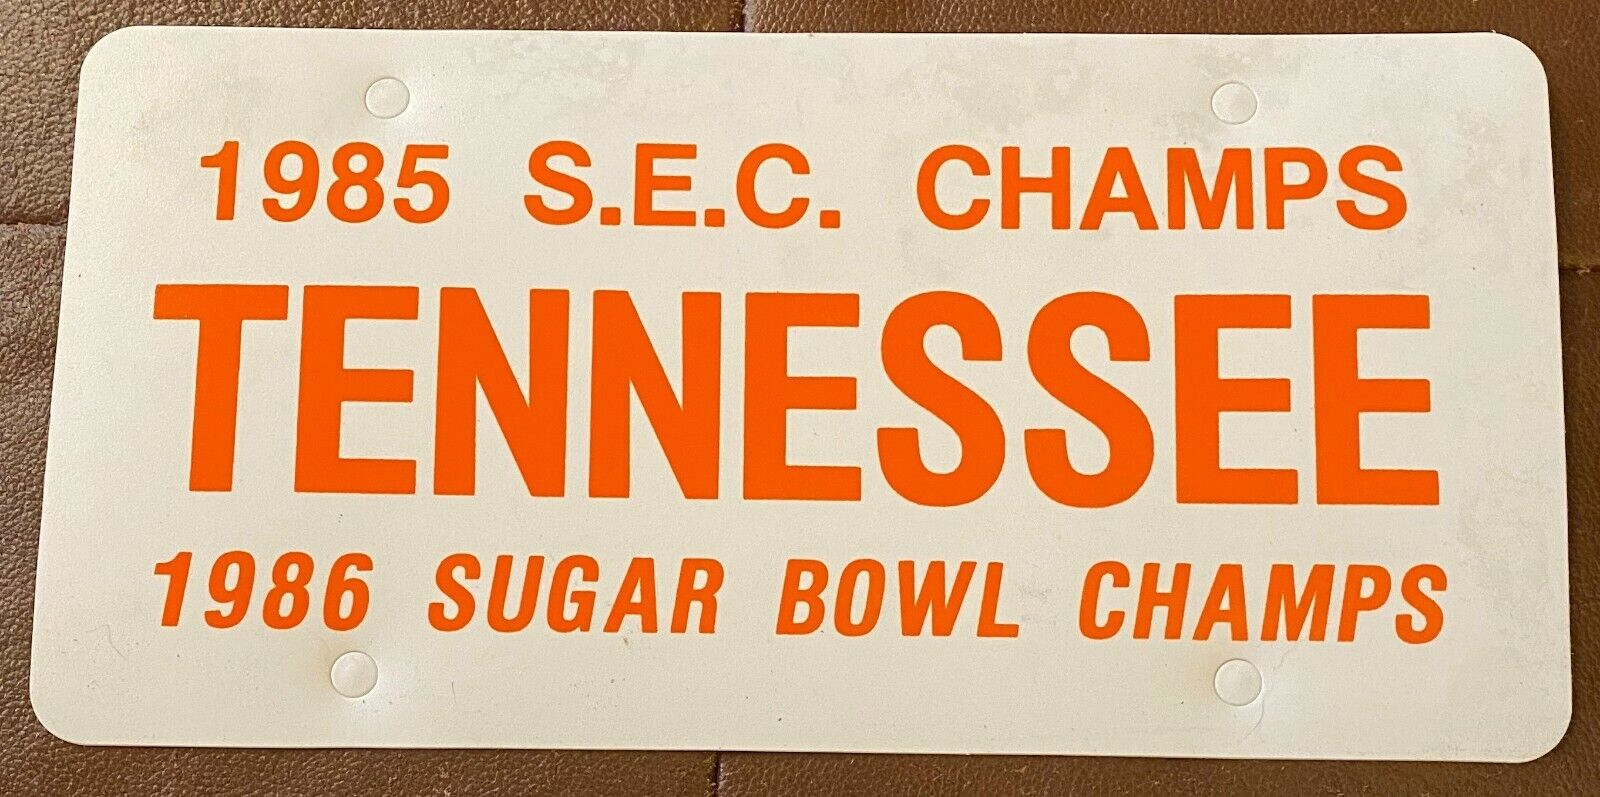 1986 SEC CHAMPS TENNESSEE 1986 SUGAR BOWL CHAMPS BOOSTER License Plate